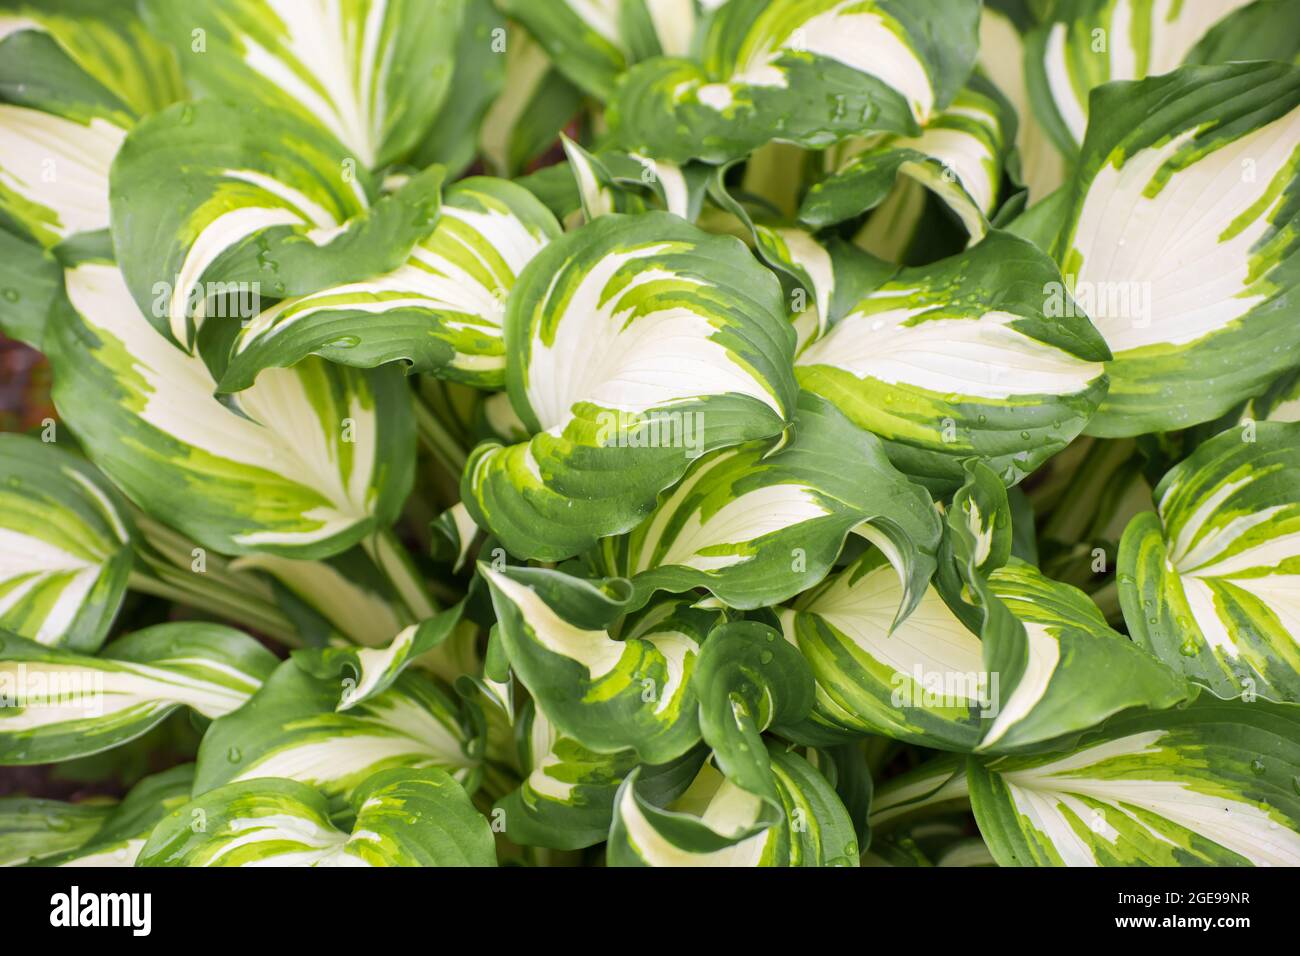 Background of green leaves with a white center. Abstraction from greening  plants. Backdrop, substrate, texture for postcards, presentations,  screensavers, captions, inscriptions or desktop wallpaper Stock Photo -  Alamy